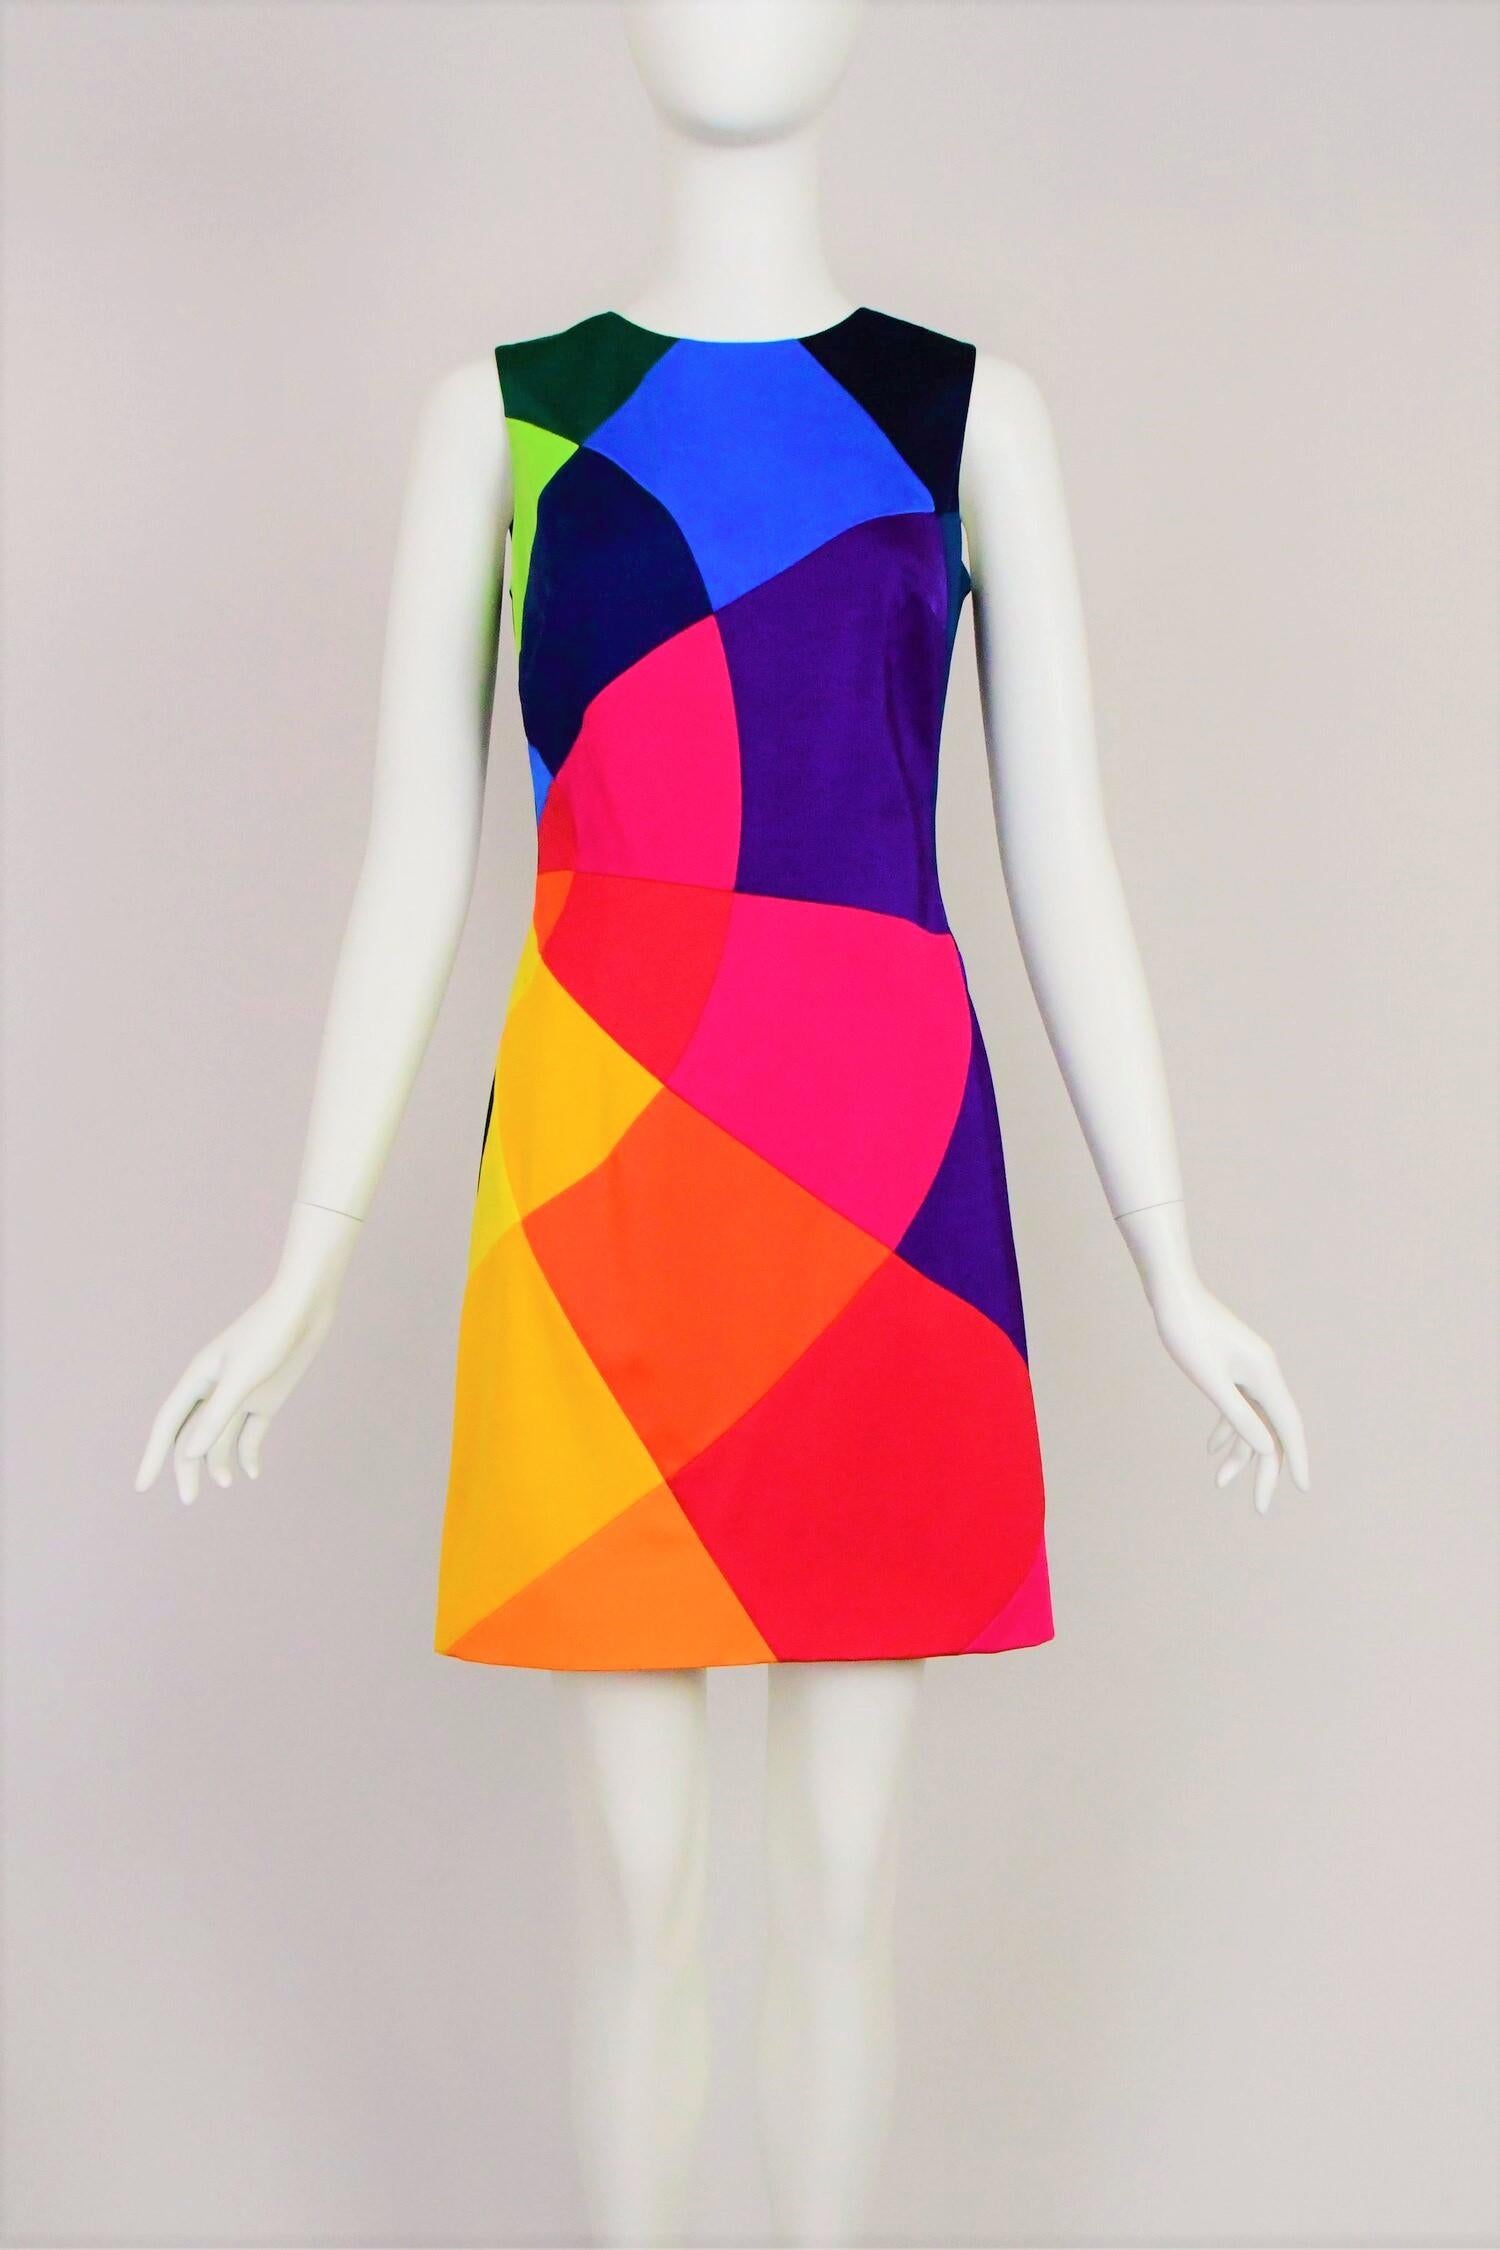 A fabulous colourful dress with a bit of stretch from Moschino. It is is sleeveless with a crew neck and incredible brightly coloured shapes each individually sewn together comprising the front of the dress, the back is solid black. It is lined in